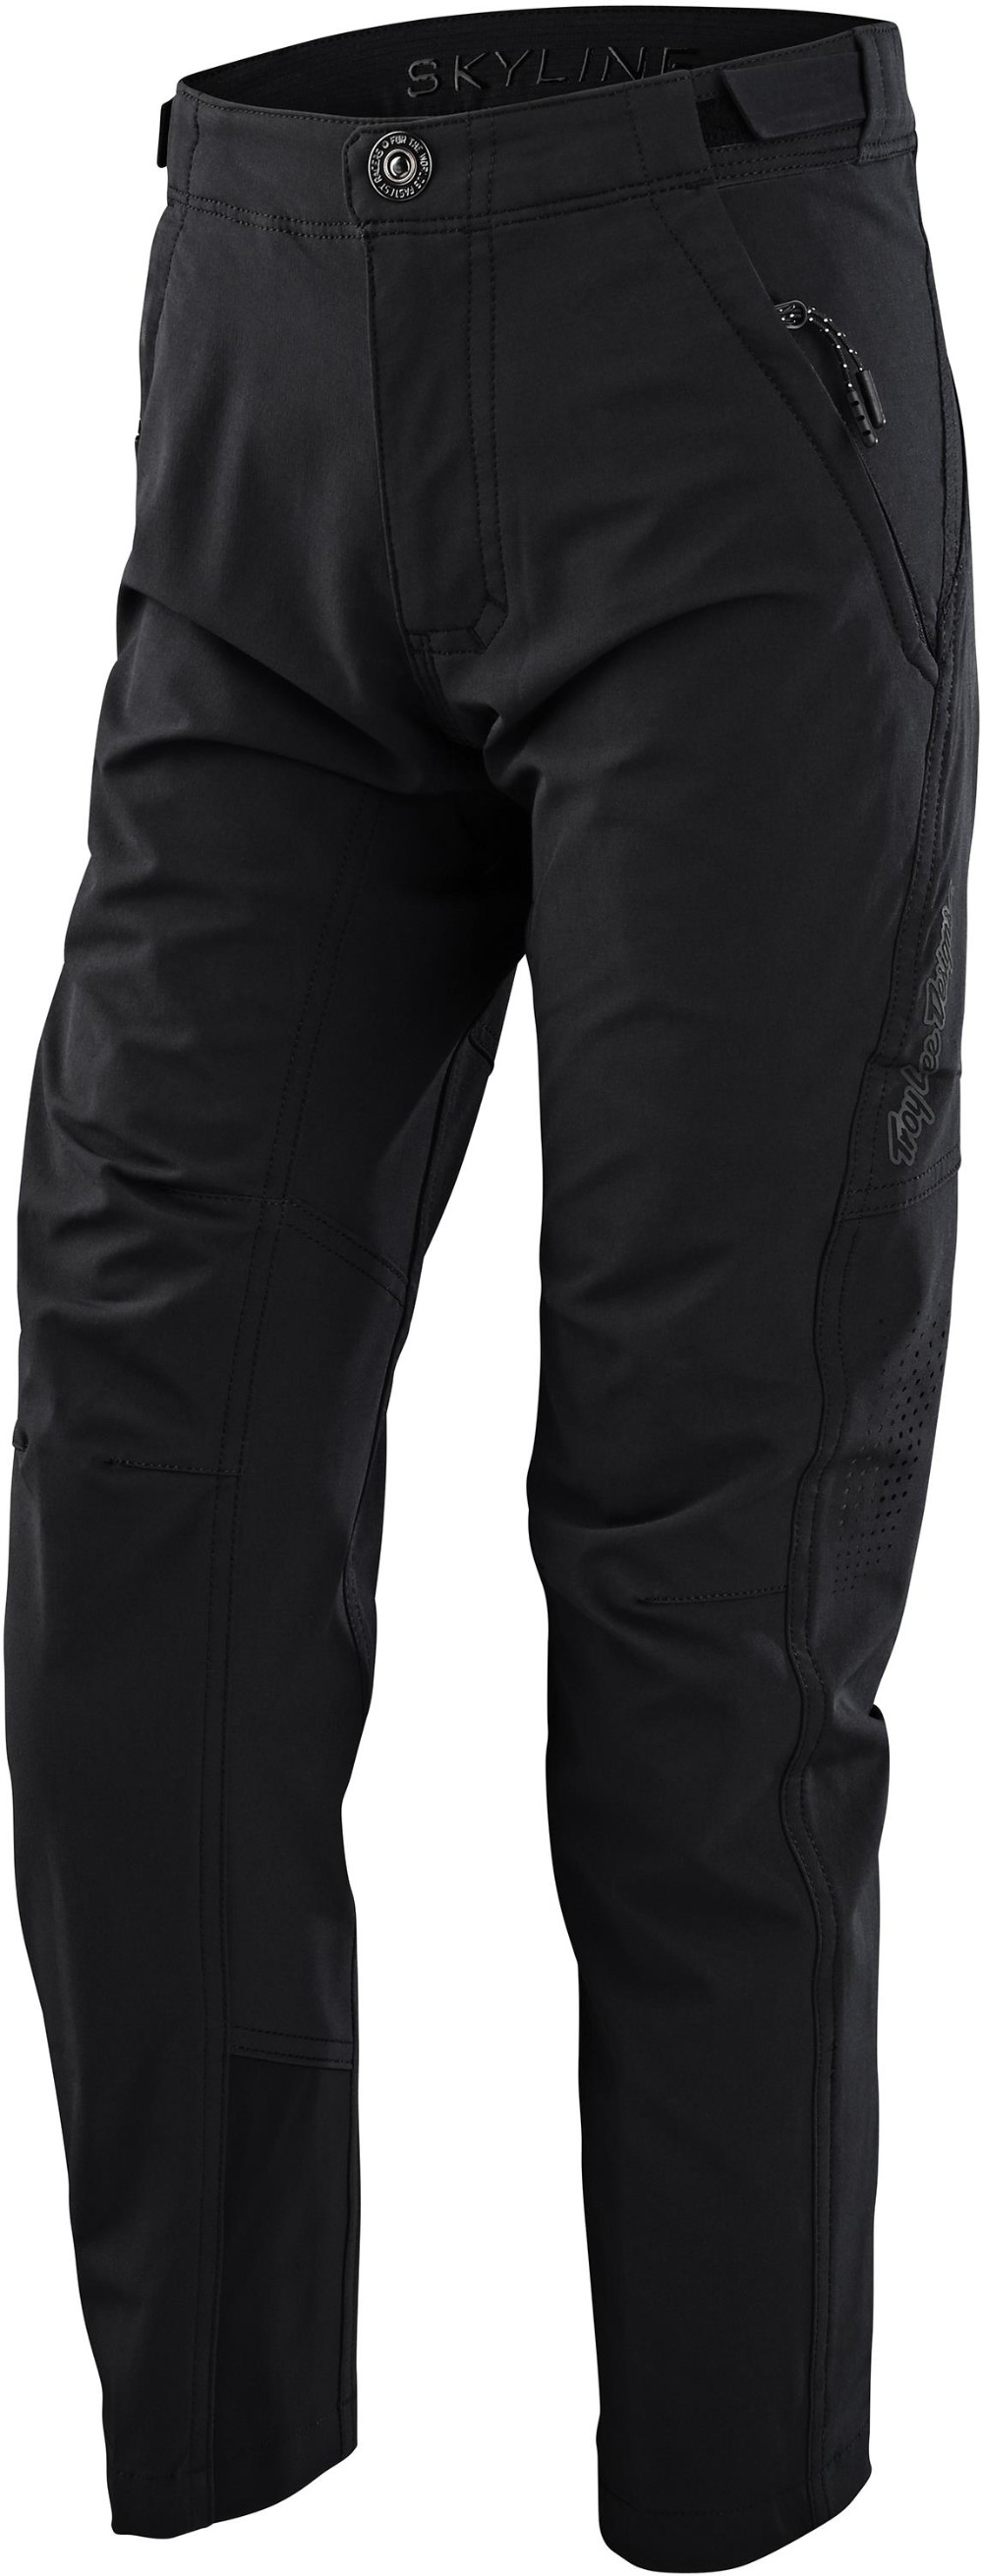 Skyline Youth MTB Cycling Trousers image 0